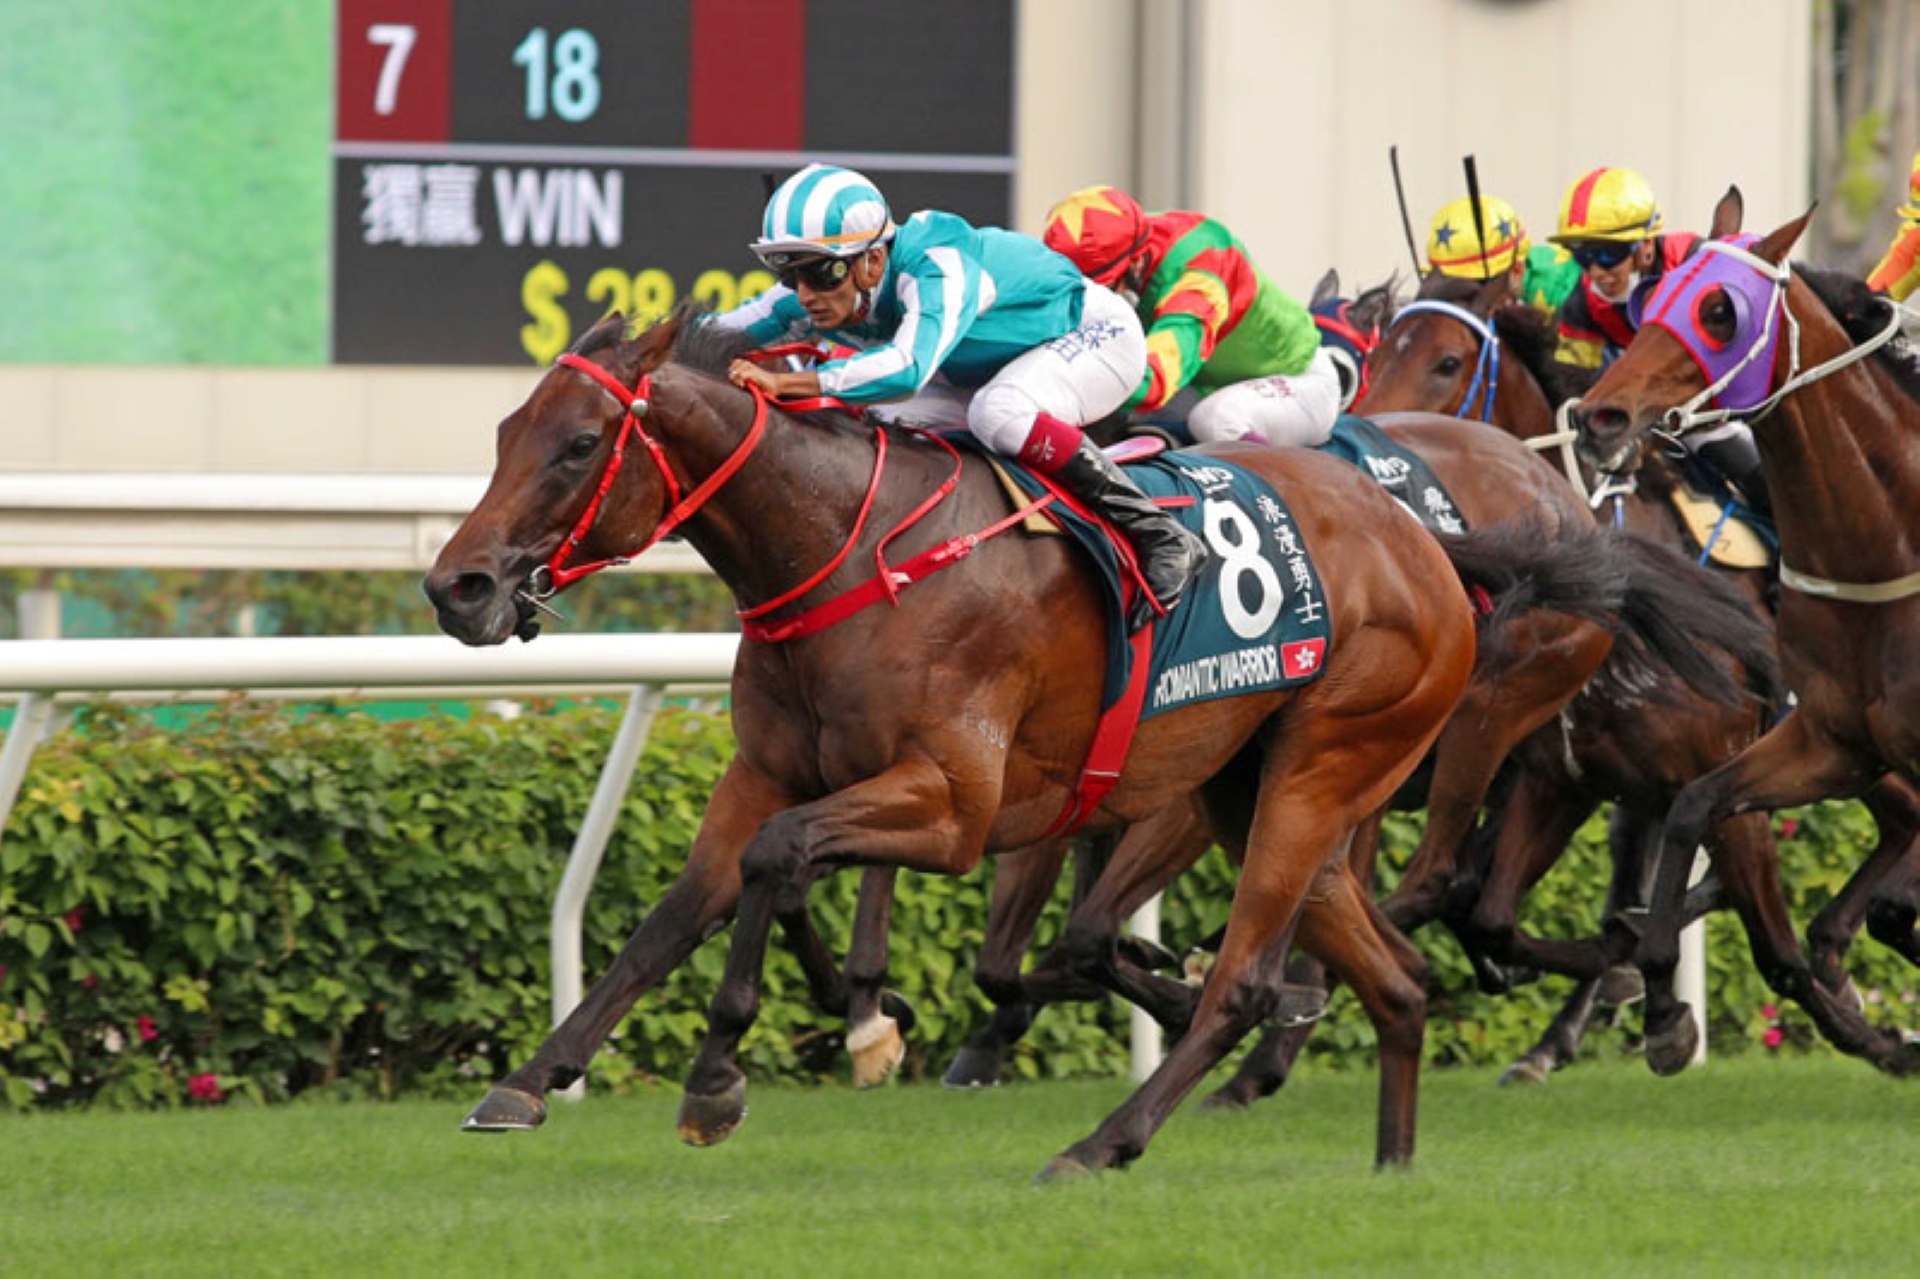 A race at the Queen Elizabeth II Cup at the Sha Tin Racecourse.